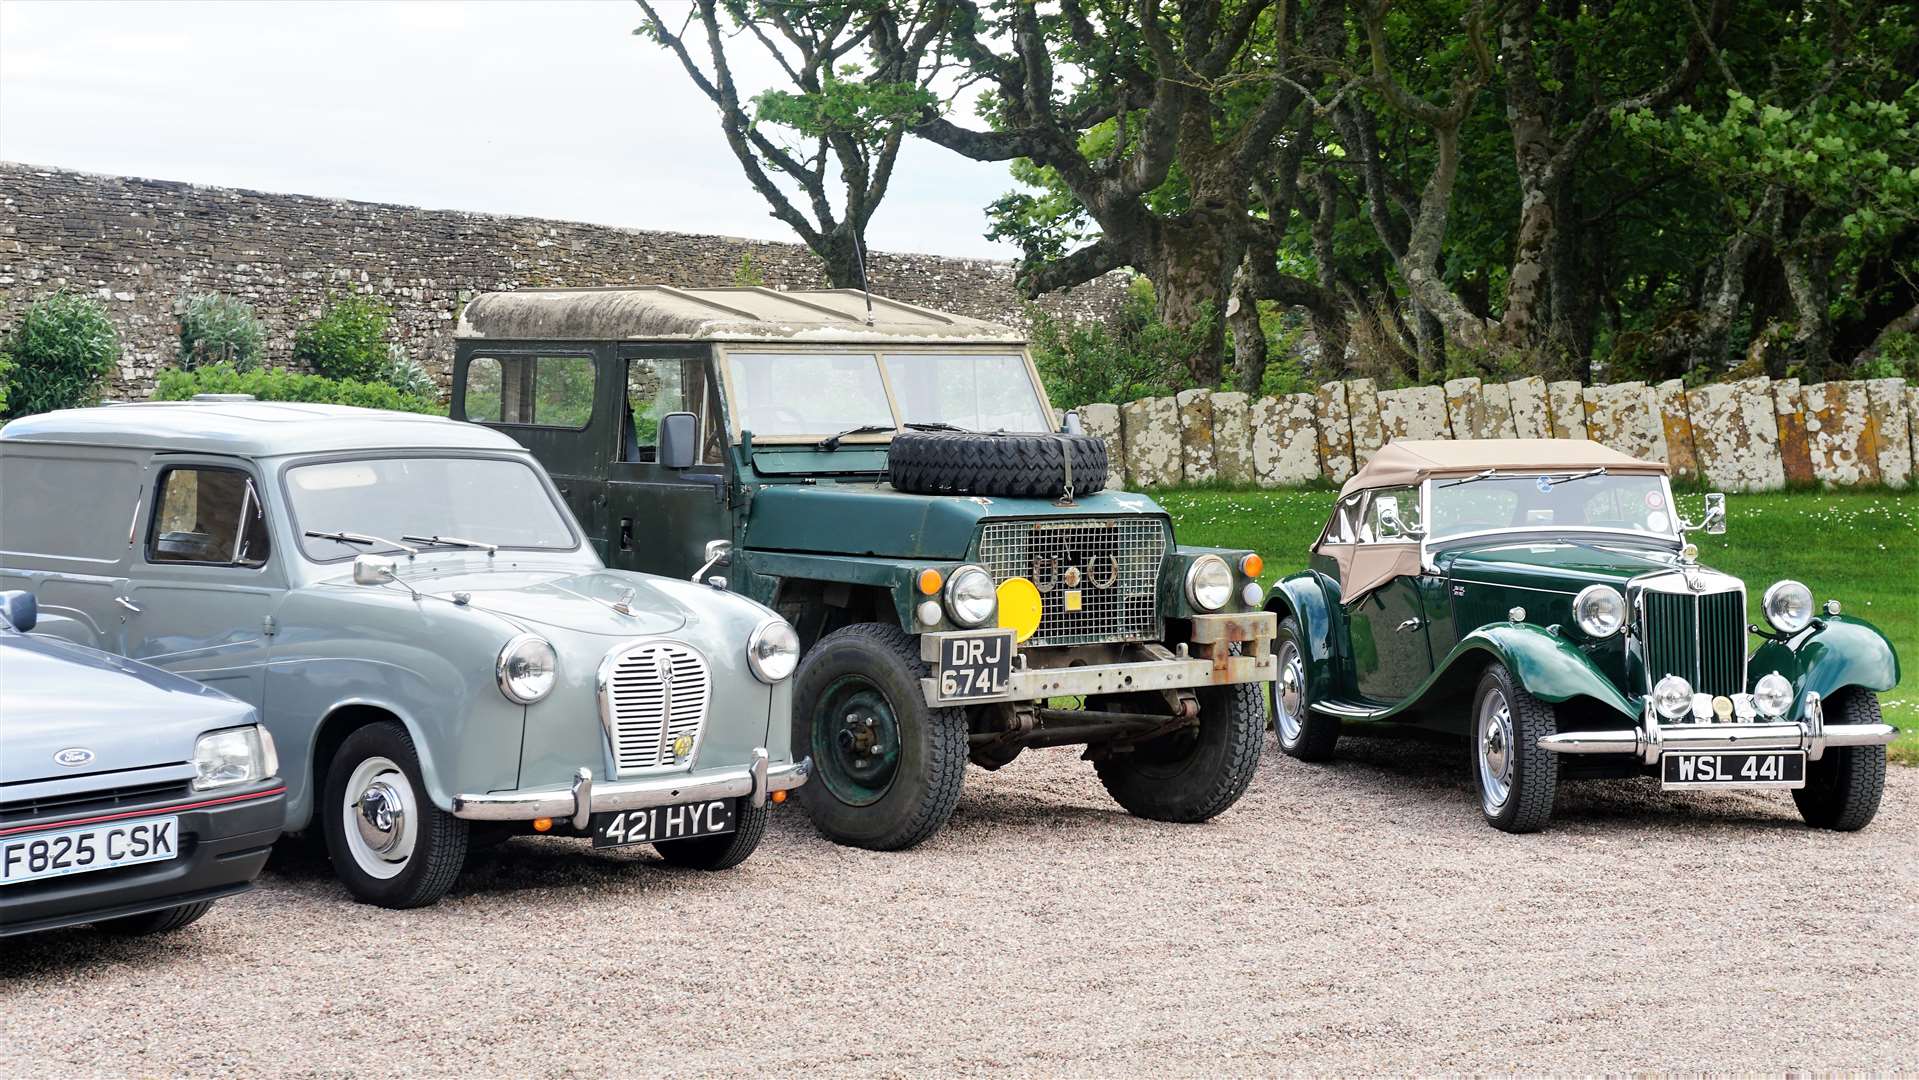 Some of the club cars outside Chateau de Mey during a social distancing event last year.  Photo: DGS